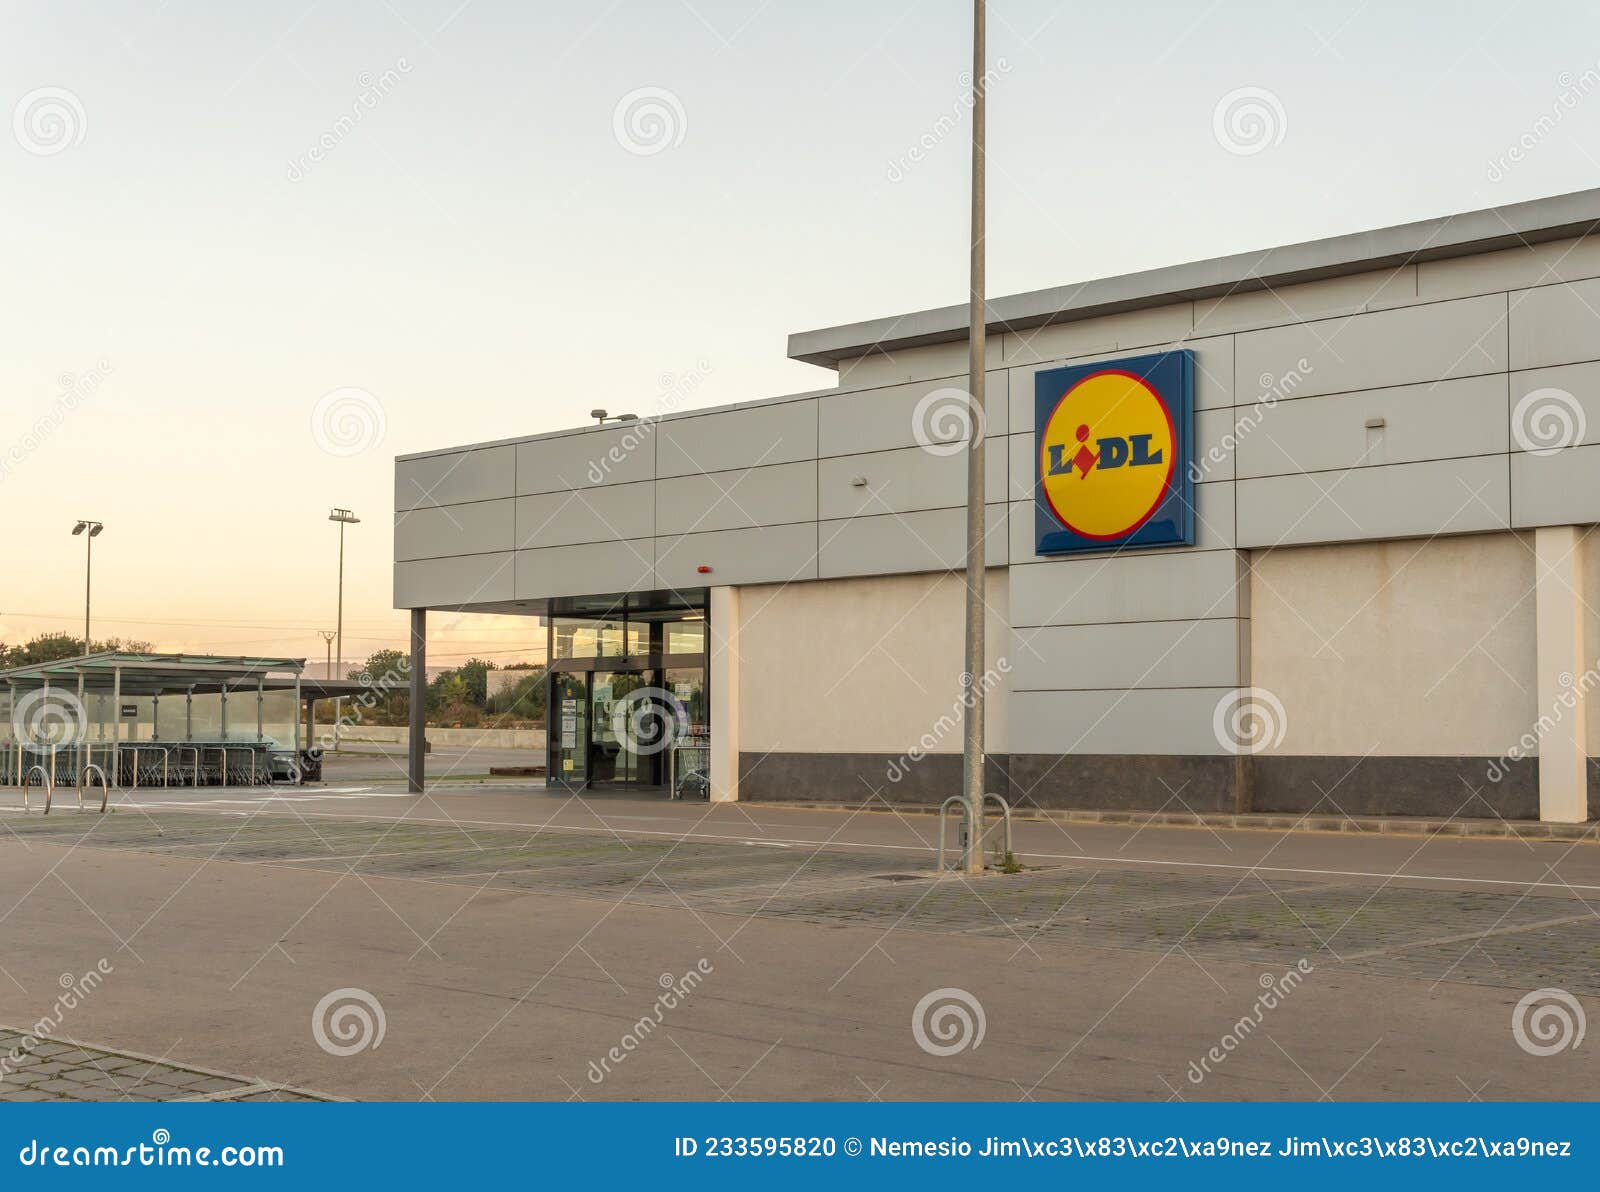 Main Facade of the Lidl Supermarket Chain - Image background, exchange: 233595820